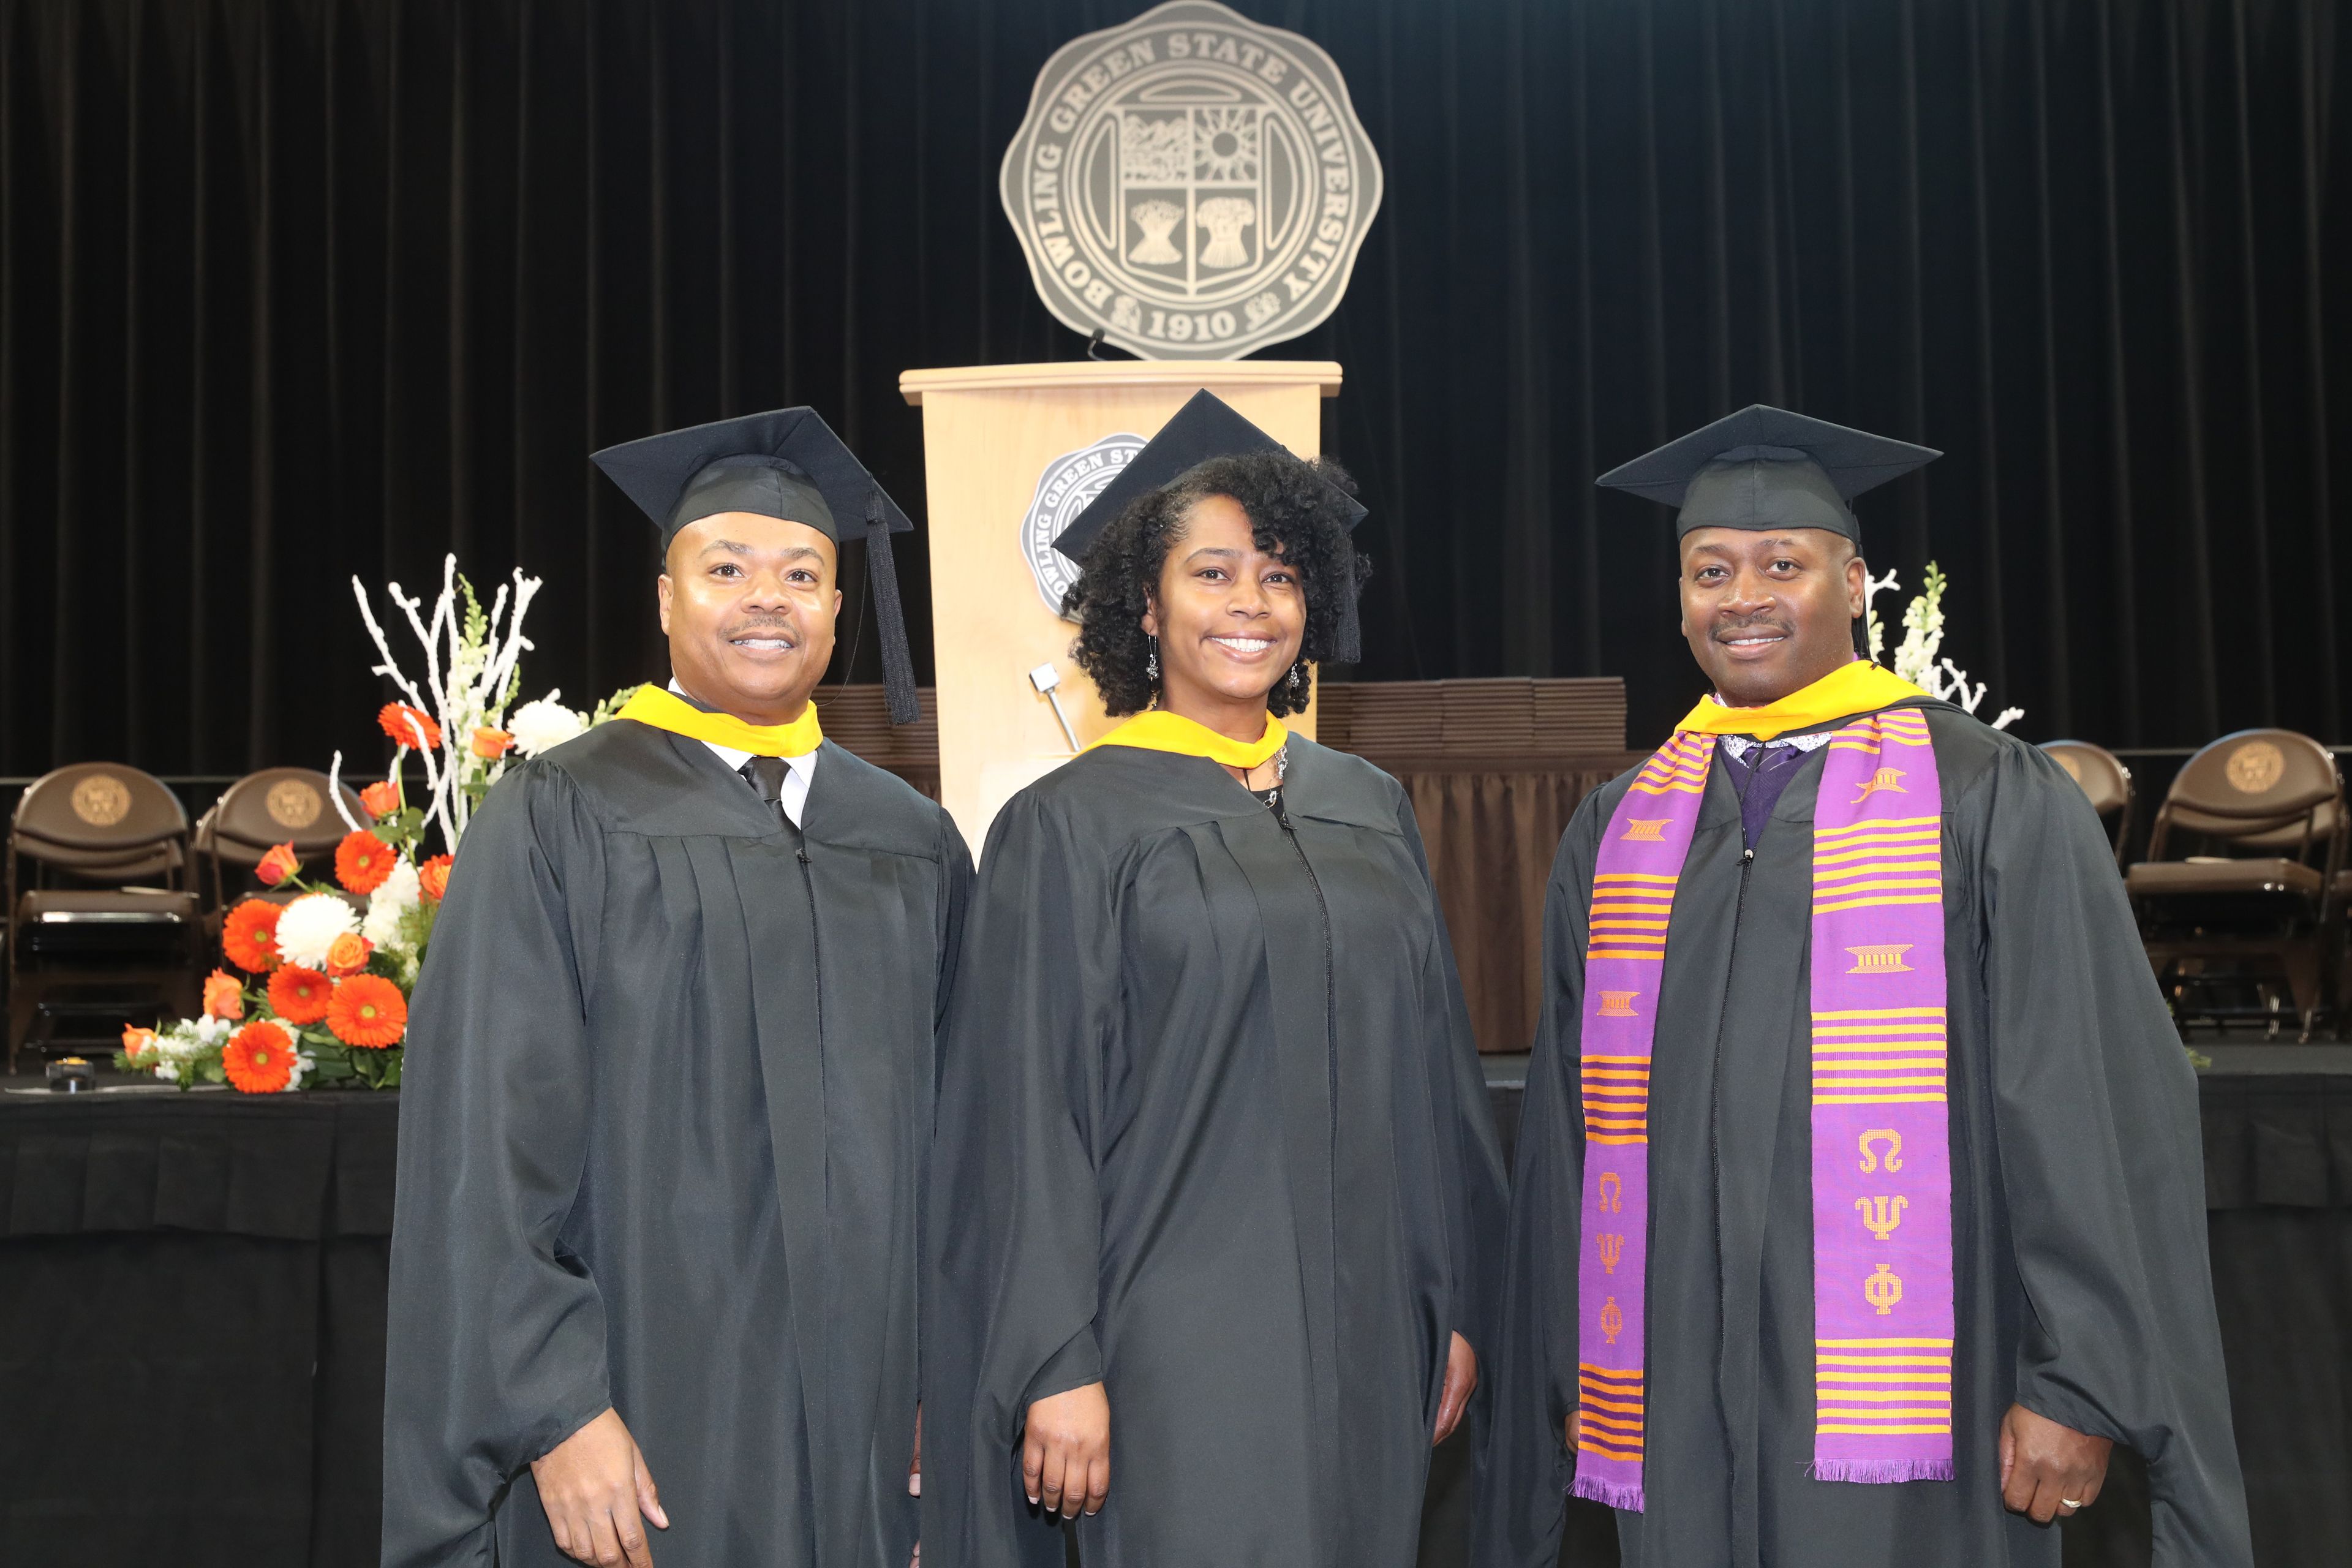 BGSU alumna Elaine Bryant stands between two people on graduation day in 2019